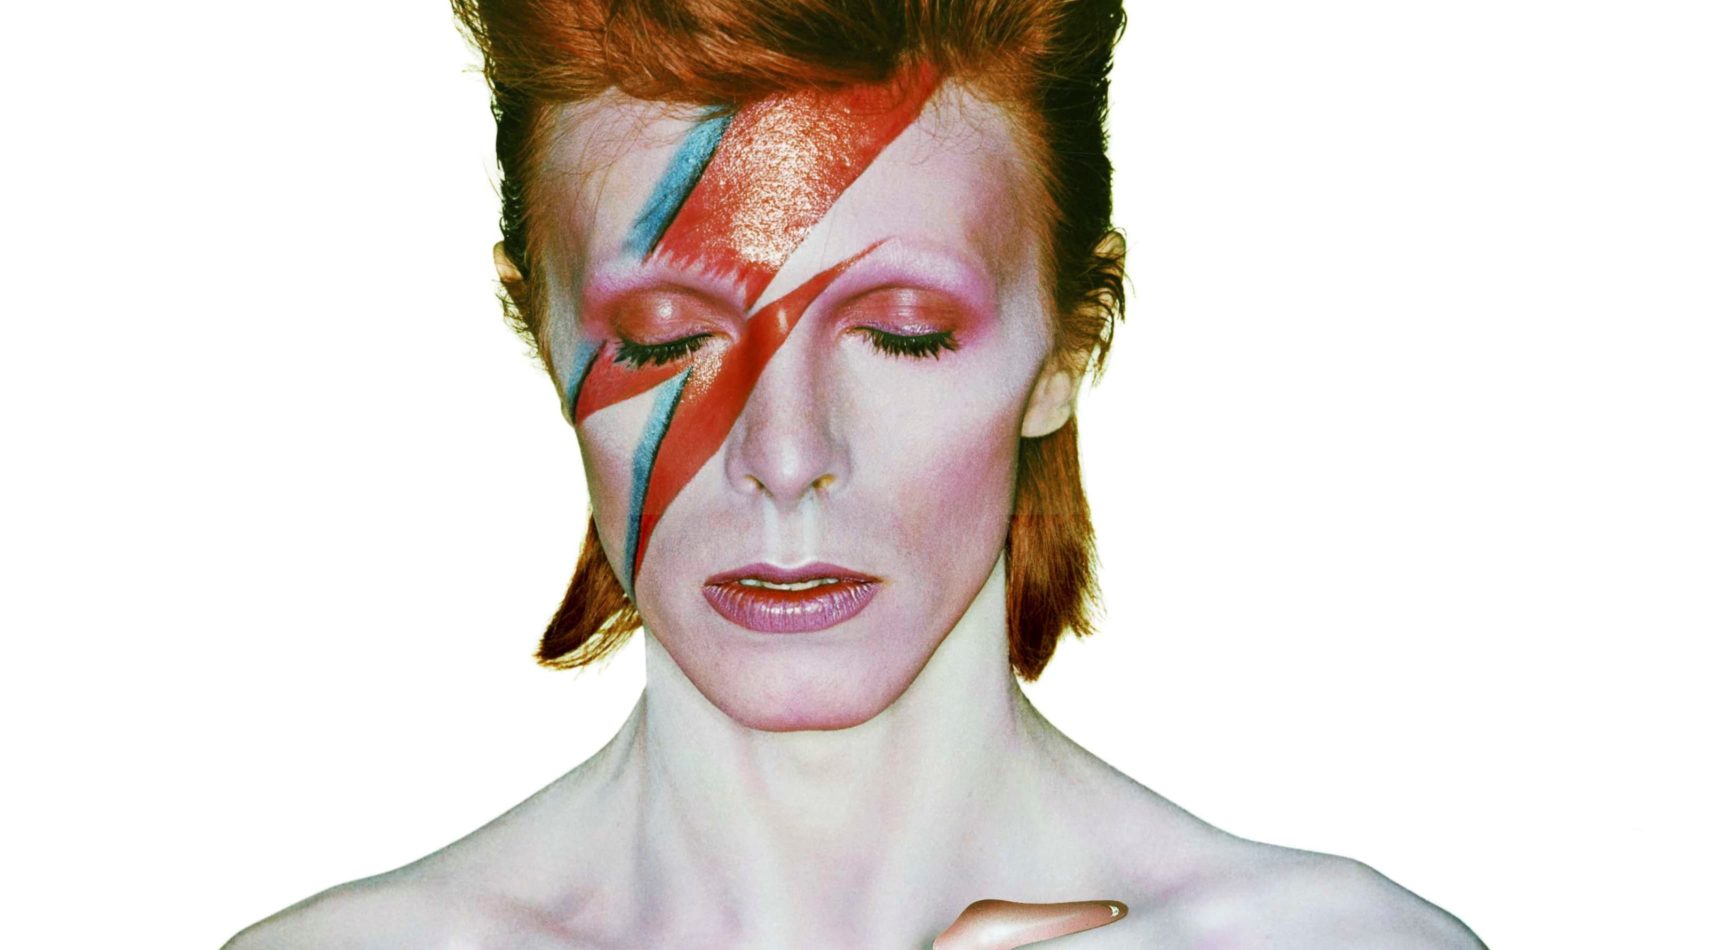 David Bowie is happening now